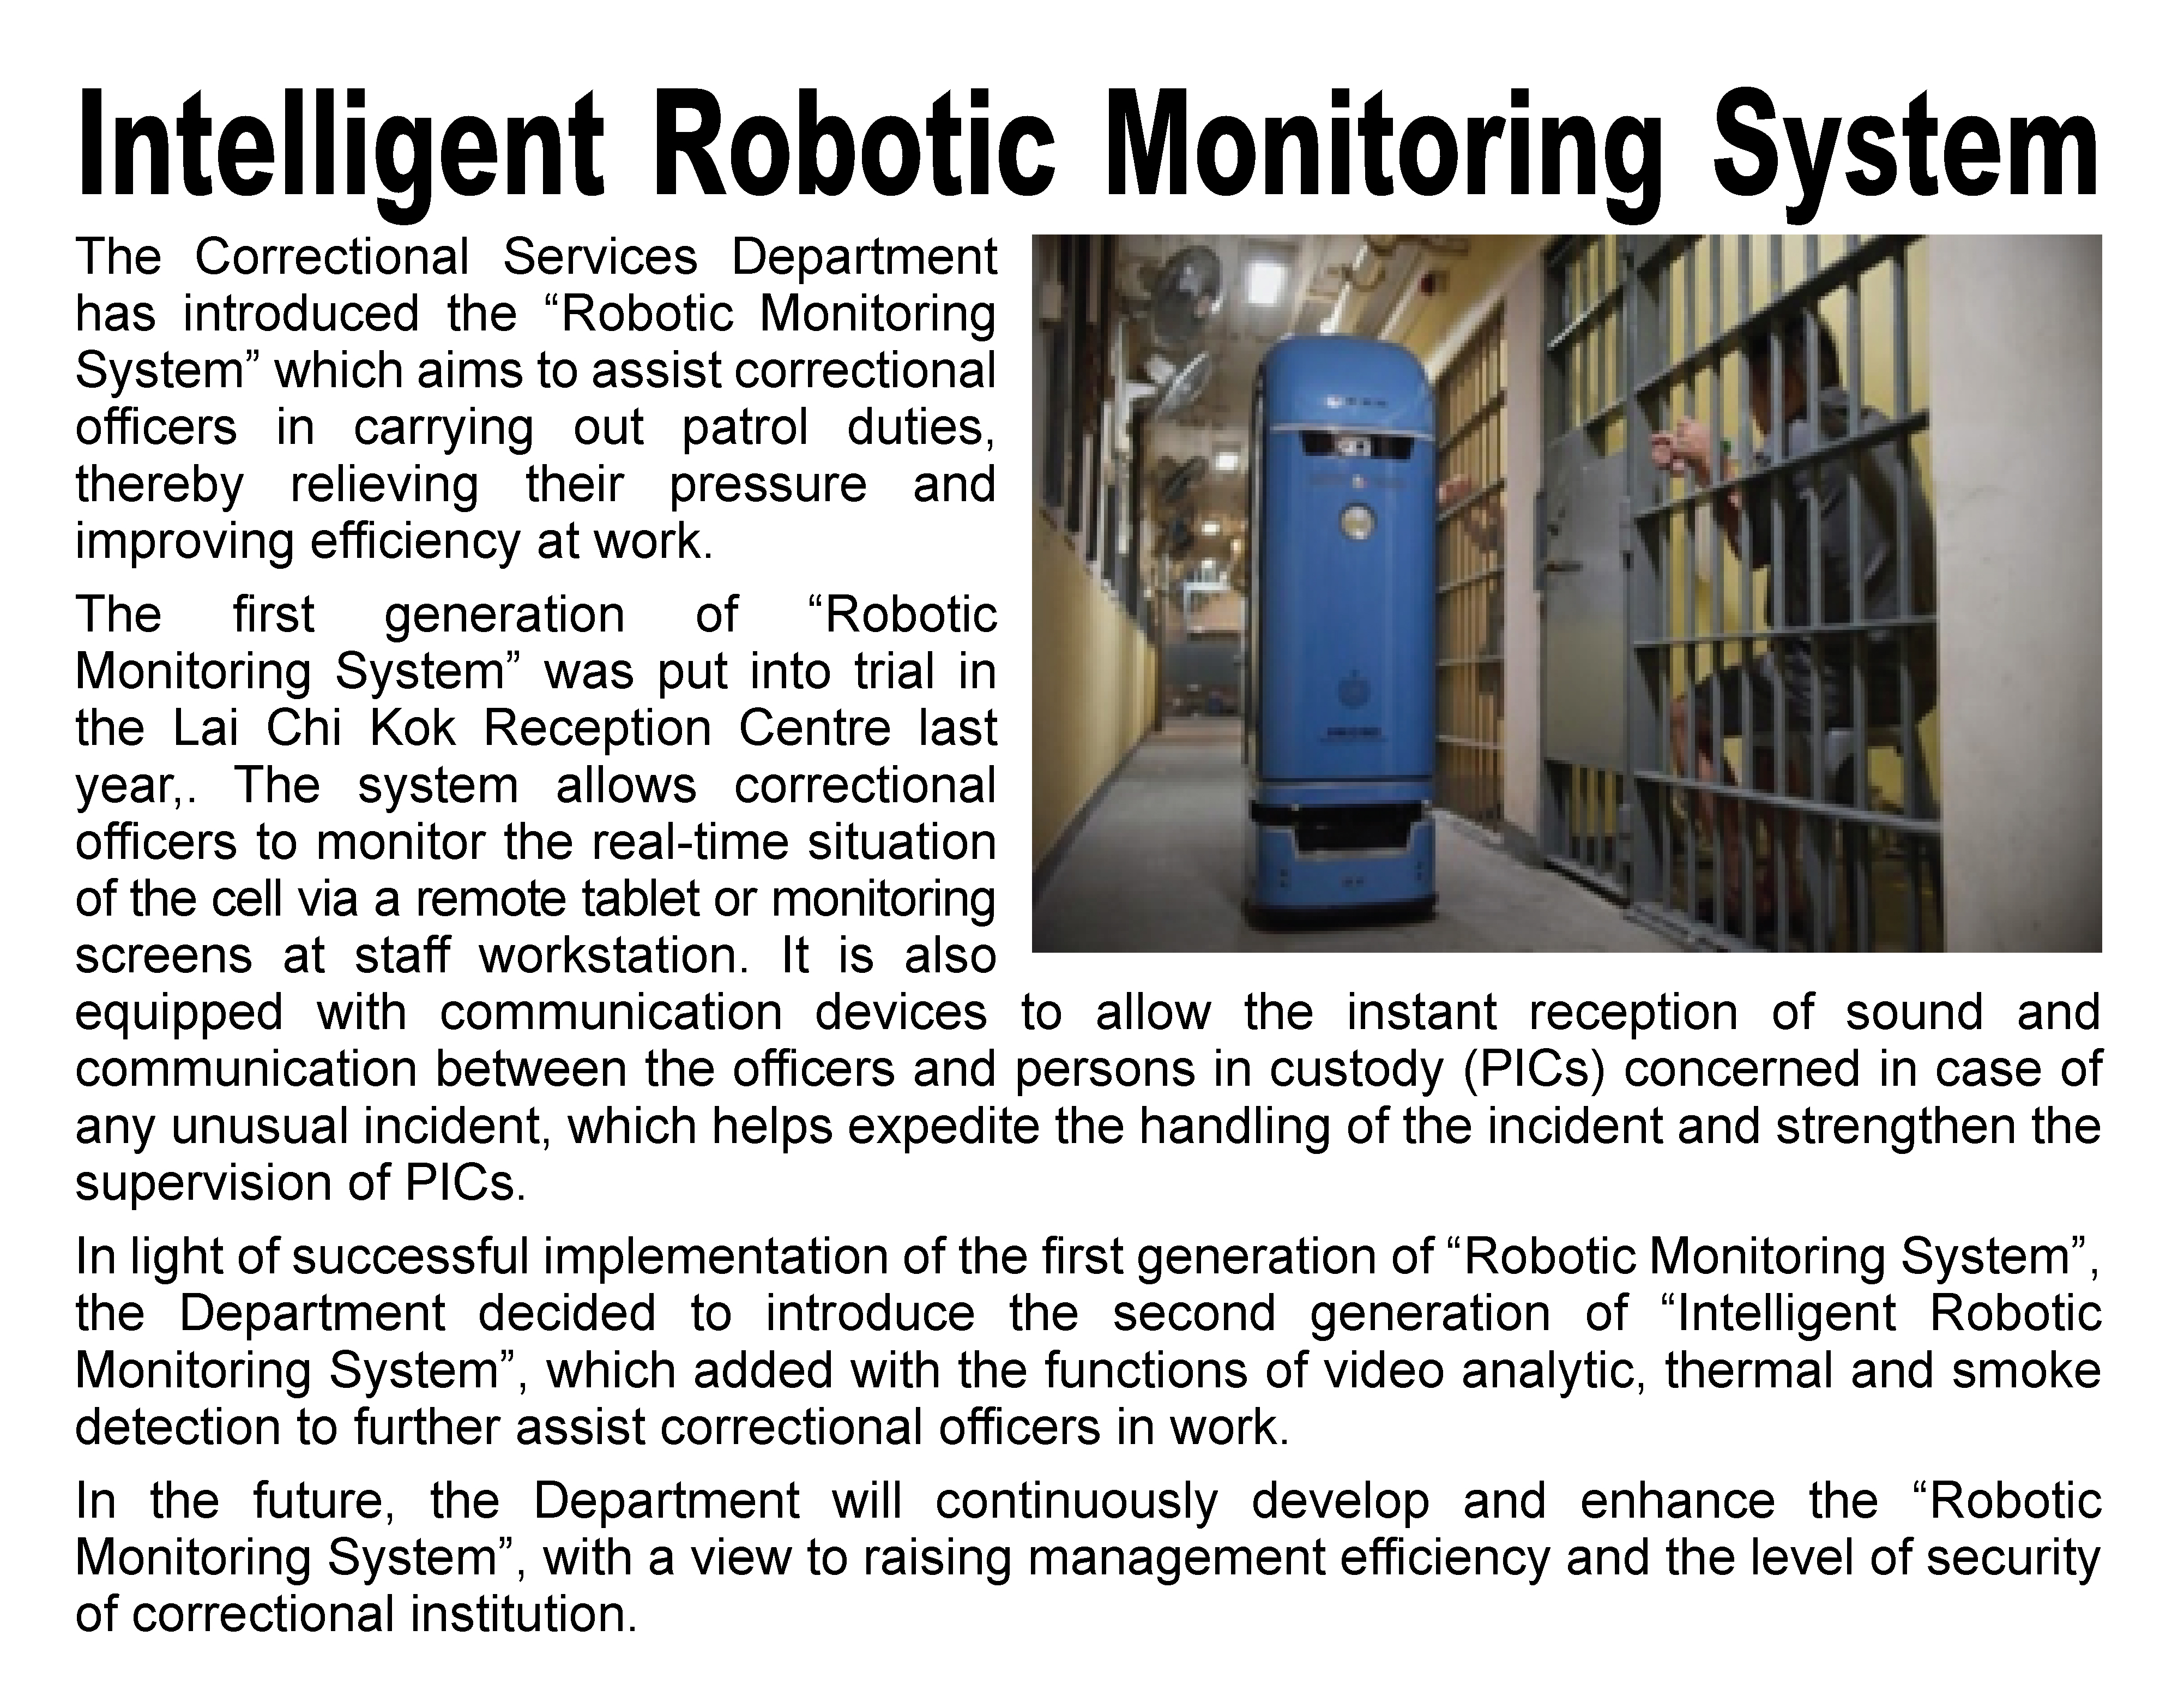 Intelligent Robotic Monitoring System,
								The Correctional Services Department has introduced the “Robotic Monitoring System” which aims to assist correctional officers in carrying out patrol duties, thereby relieving their pressure and improving efficiency at work. 
								The first generation of “Robotic Monitoring System” was put into trial in the Lai Chi Kok Reception Centre last year,. The system allows correctional officers to monitor the real-time situation of the cell via a remote tablet or monitoring screens at staff workstation. It is also equipped with communication devices to allow the instant reception of sound and communication between the officers and persons in custody (PICs) concerned in case of any unusual incident, which helps expedite the handling of the incident and strengthen the supervision of PICs.
								In light of successful implementation of the first generation of “Robotic Monitoring System”, the Department decided to introduce the second generation of “Intelligent Robotic Monitoring System”, which added with the functions of video analytic, thermal and smoke detection to further assist correctional officers in work.
								In the future, the Department will continuously develop and enhance the “Robotic Monitoring System”, with a view to raising management efficiency and the level of security of correctional institution.